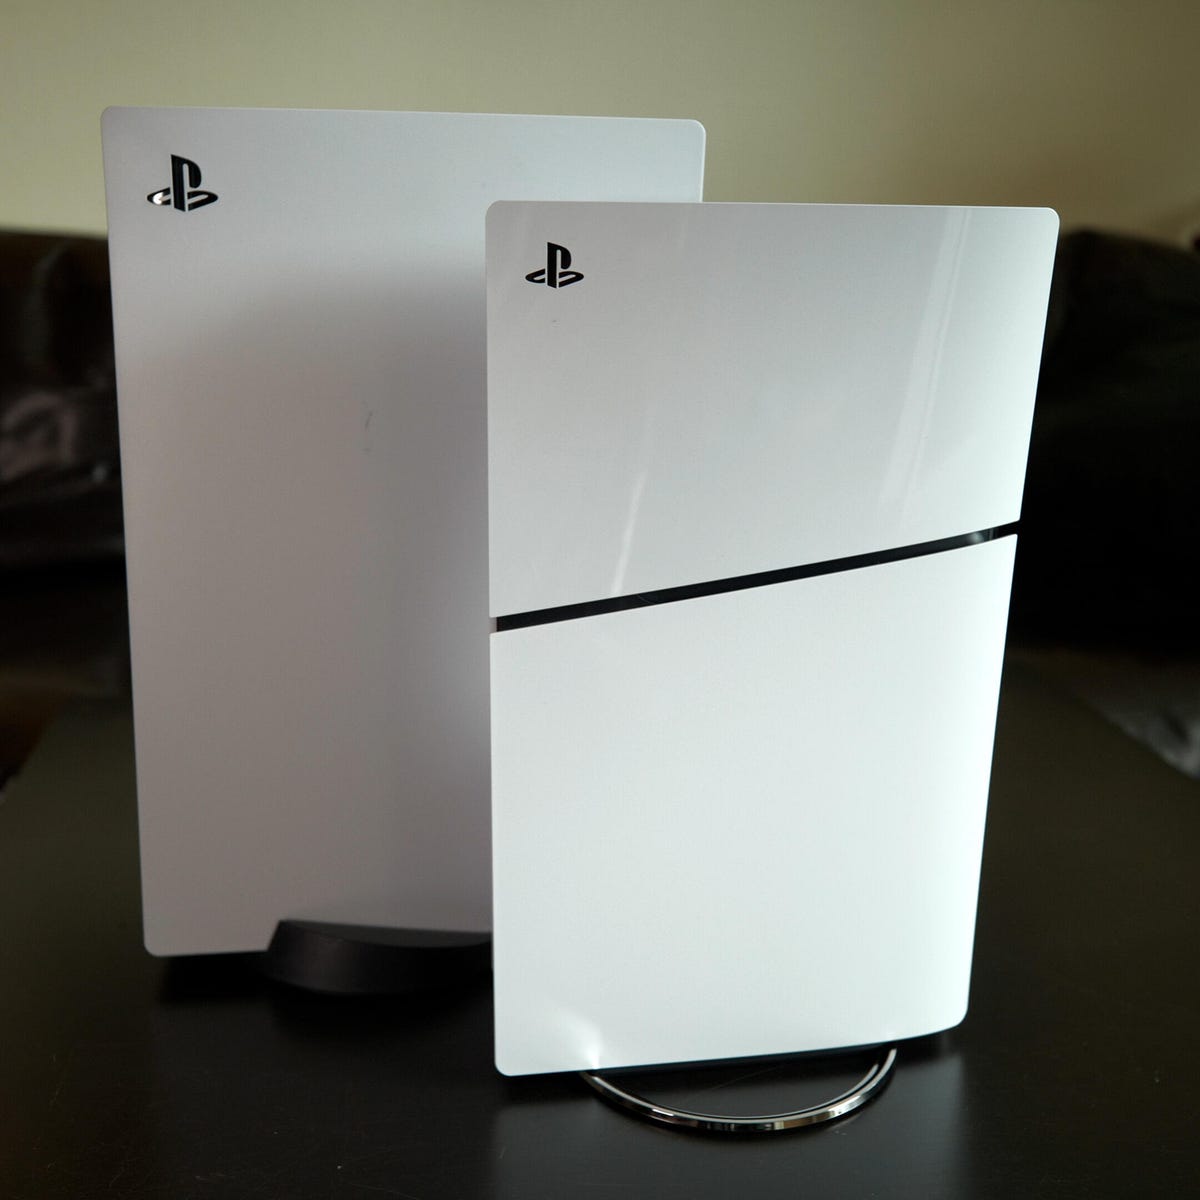 Slim PlayStation 5: Hands-On With Sony's New, More Compact Console